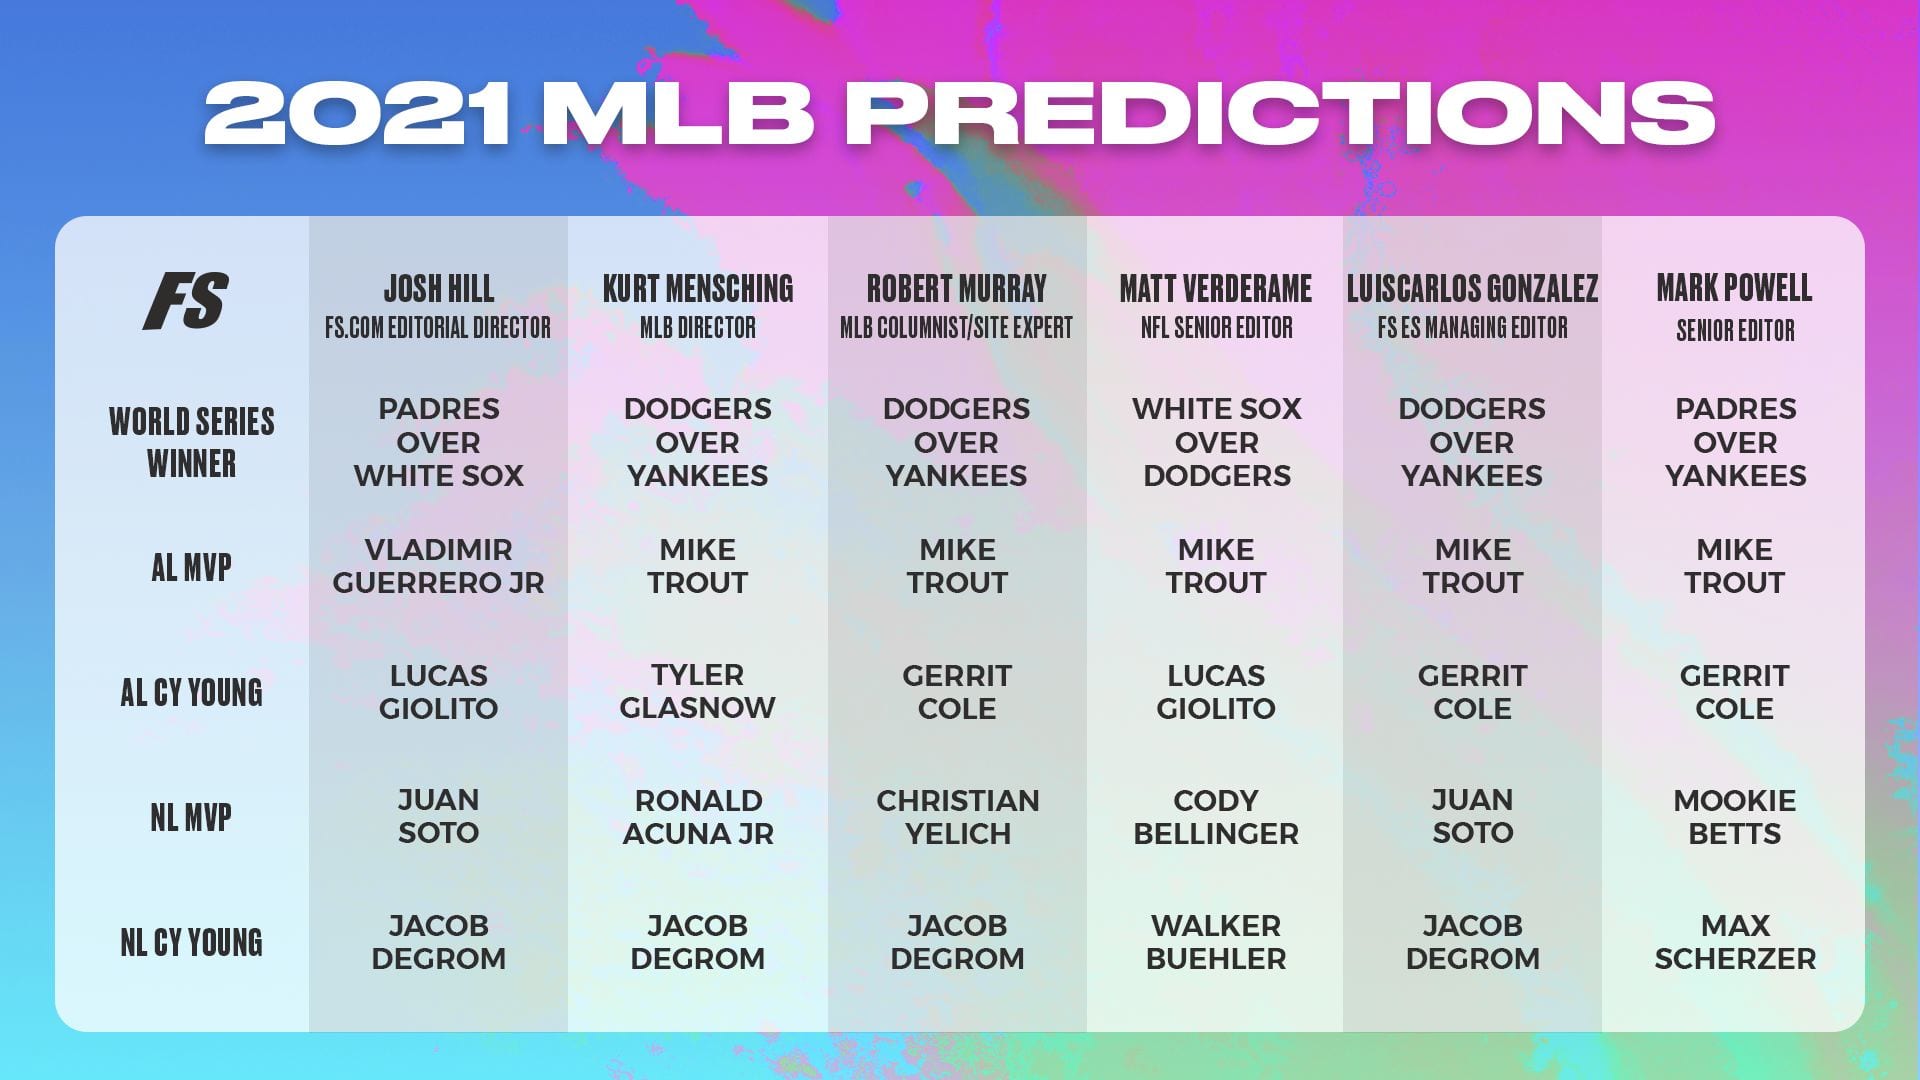 MLB Expert predictions for who will win World Series, MVP, and more